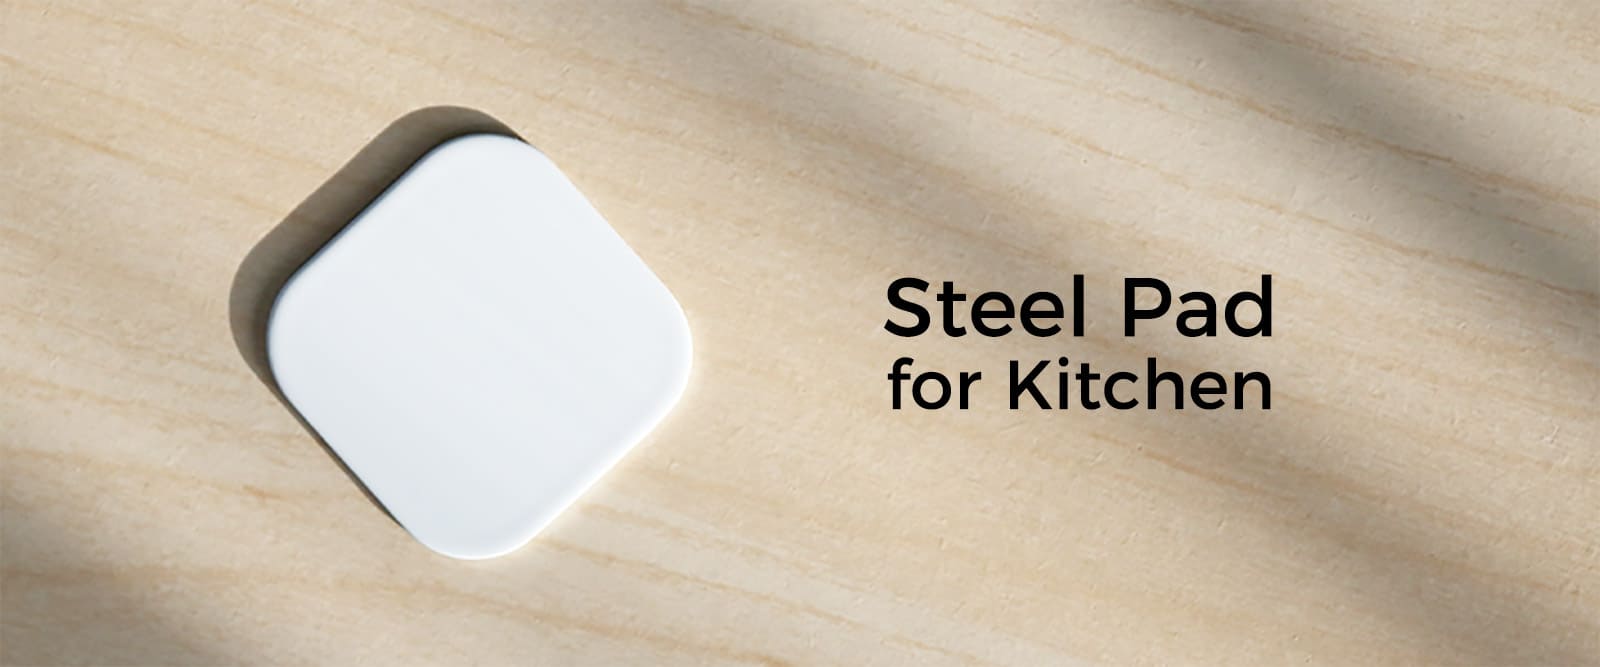 Steel Pad for Kitchen